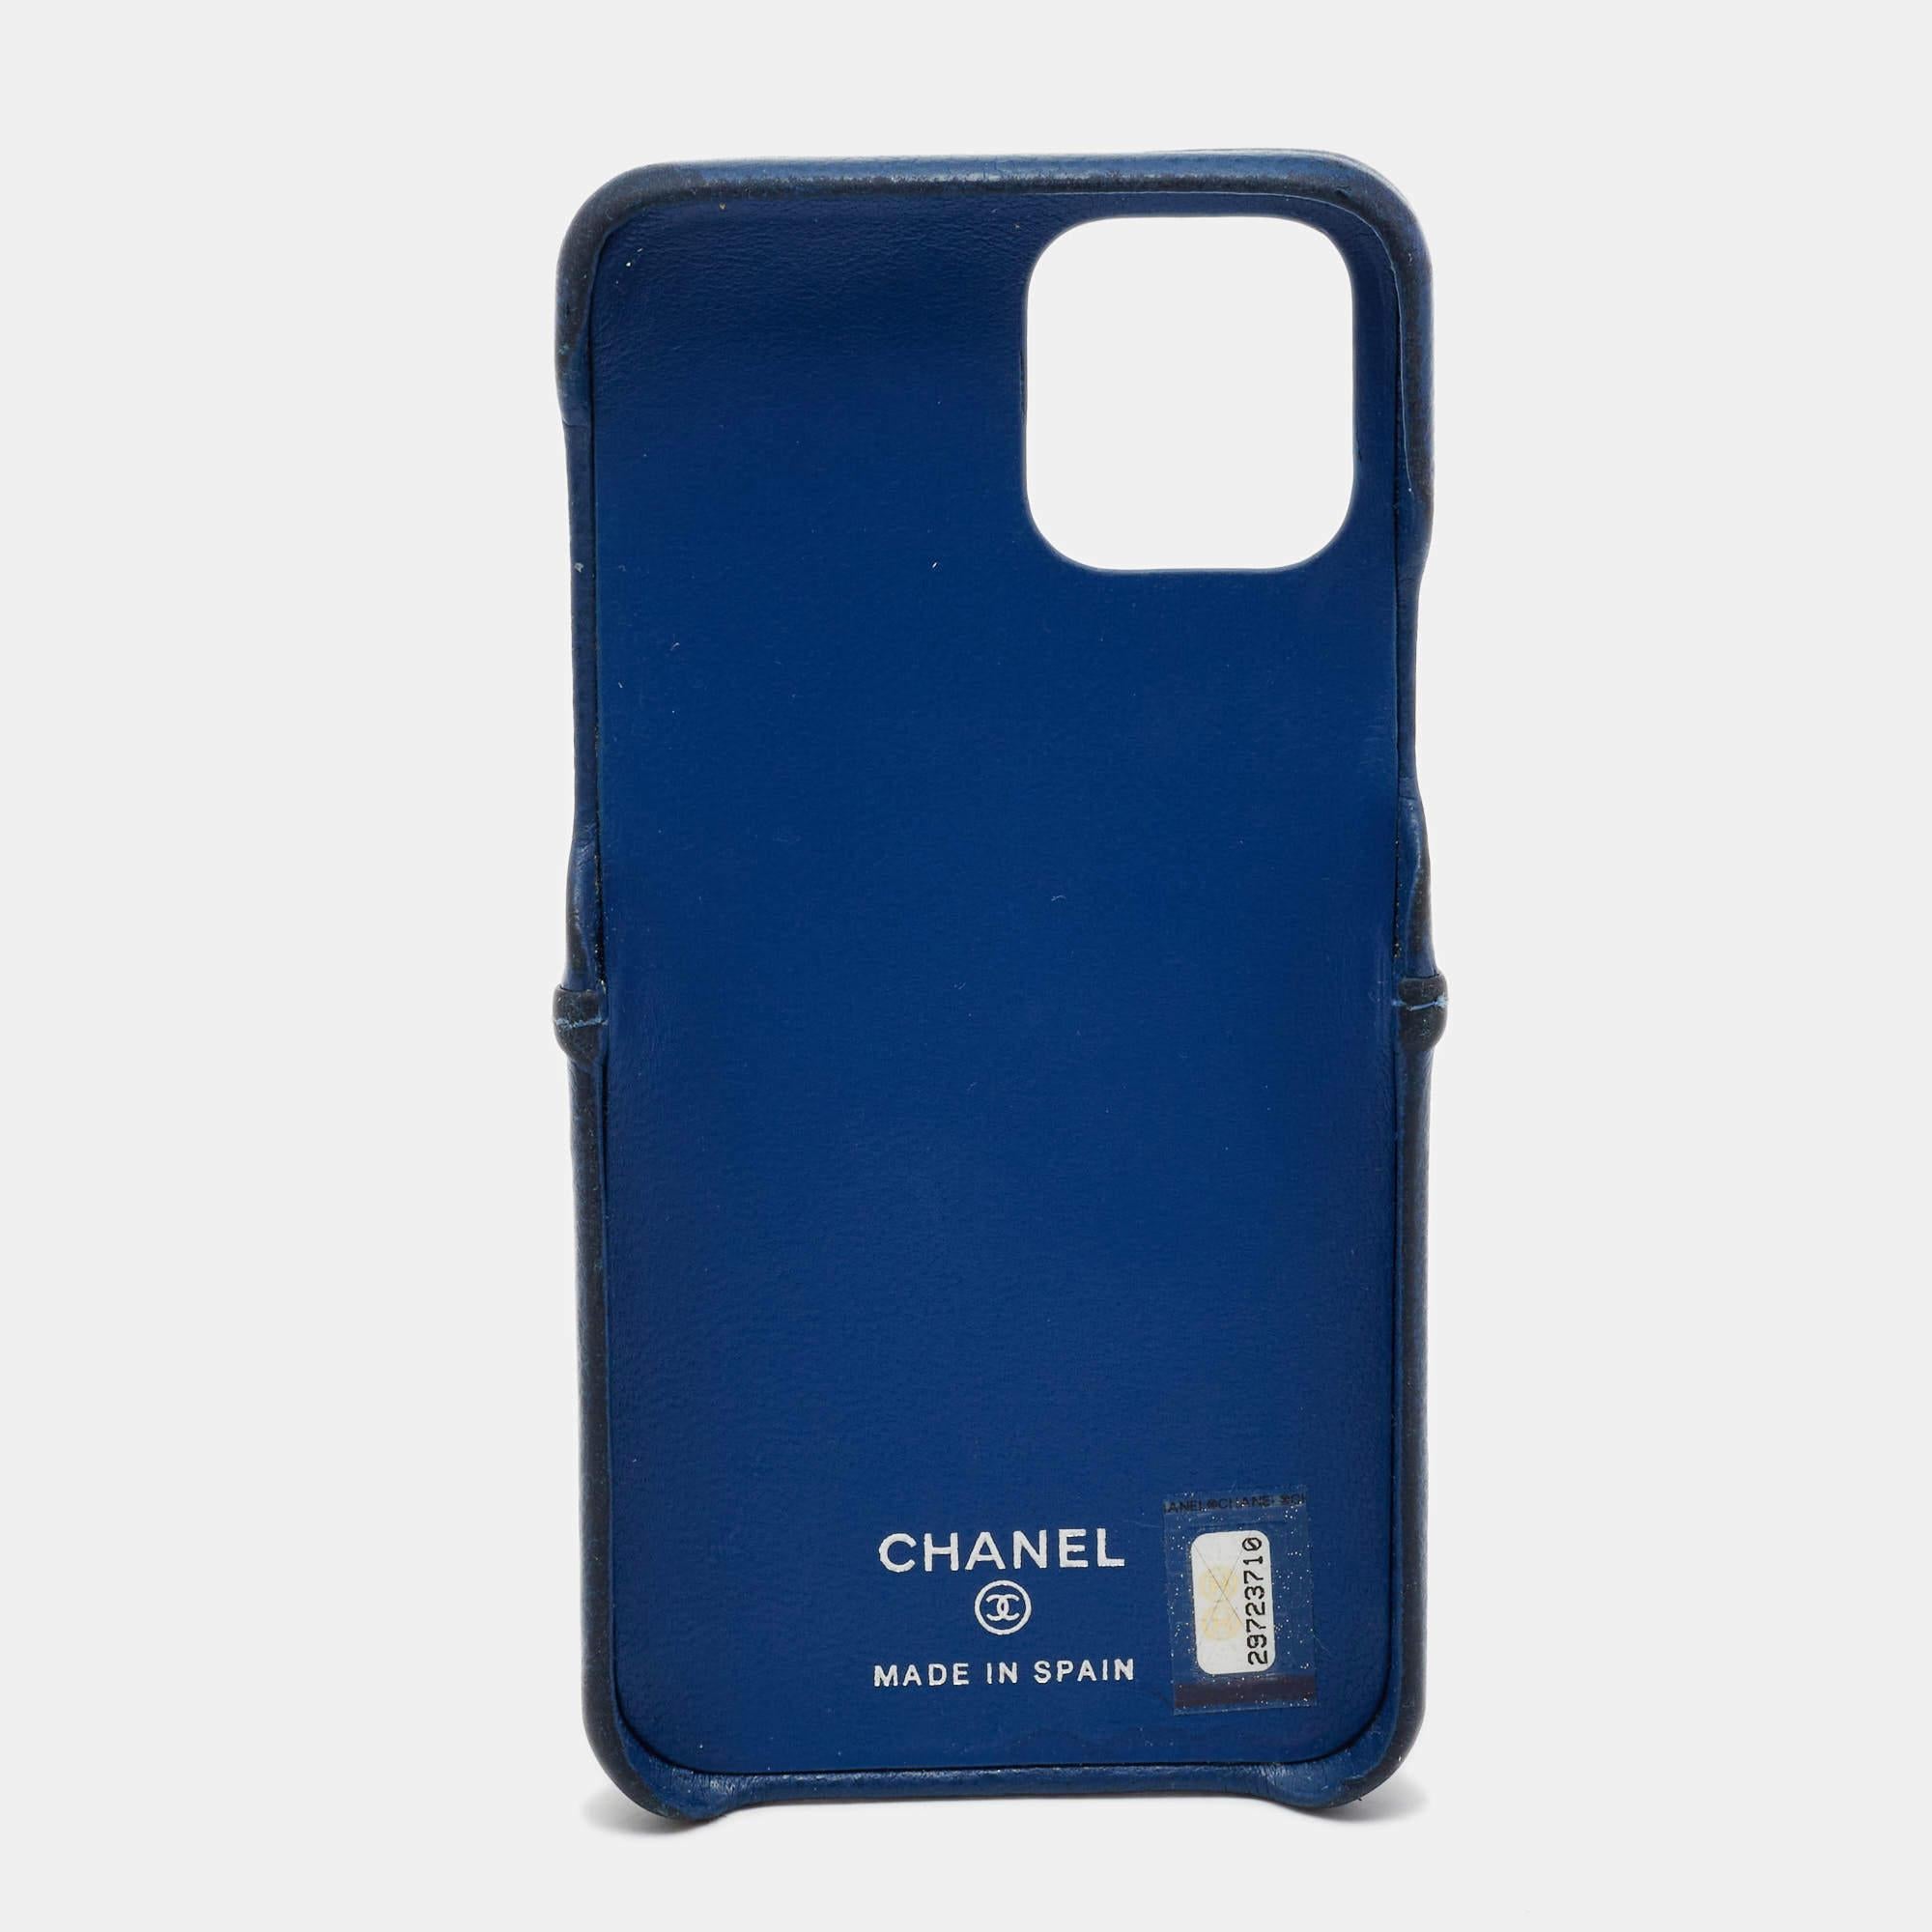 This case from Chanel is for iPhone 11 Pro users. It is made from leather and features the signature diamond quilting, a slip pocket, and the CC logo. The case has been designed to protect your phone while complementing your style at the same